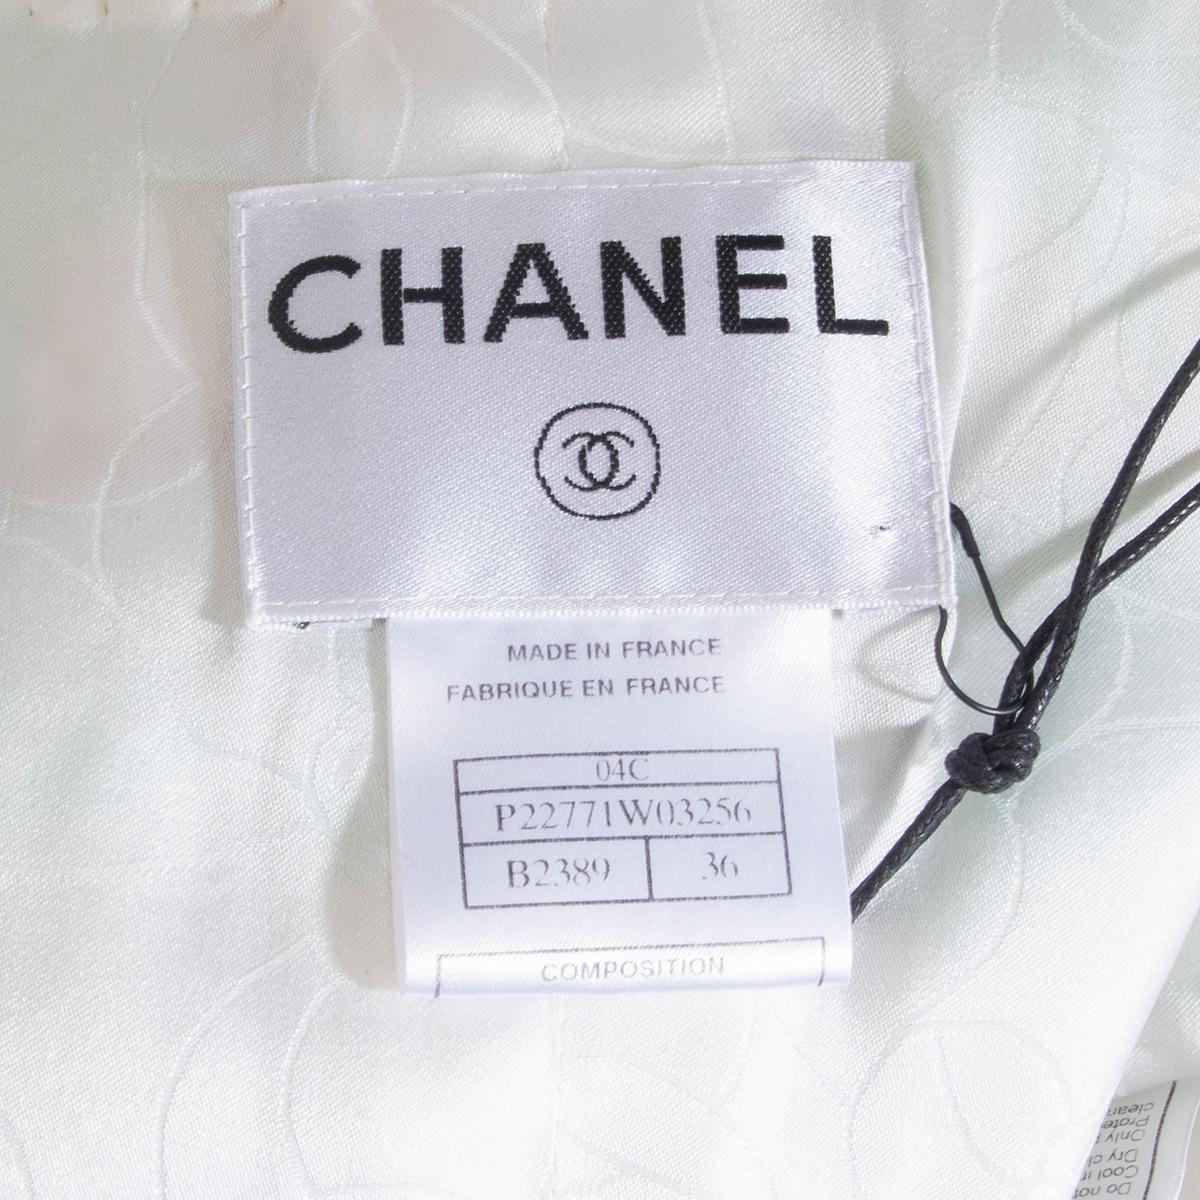 CHANEL mint green viscose 2004 04C PUSSY BOW TWEED Jacket 36 XS For Sale 2